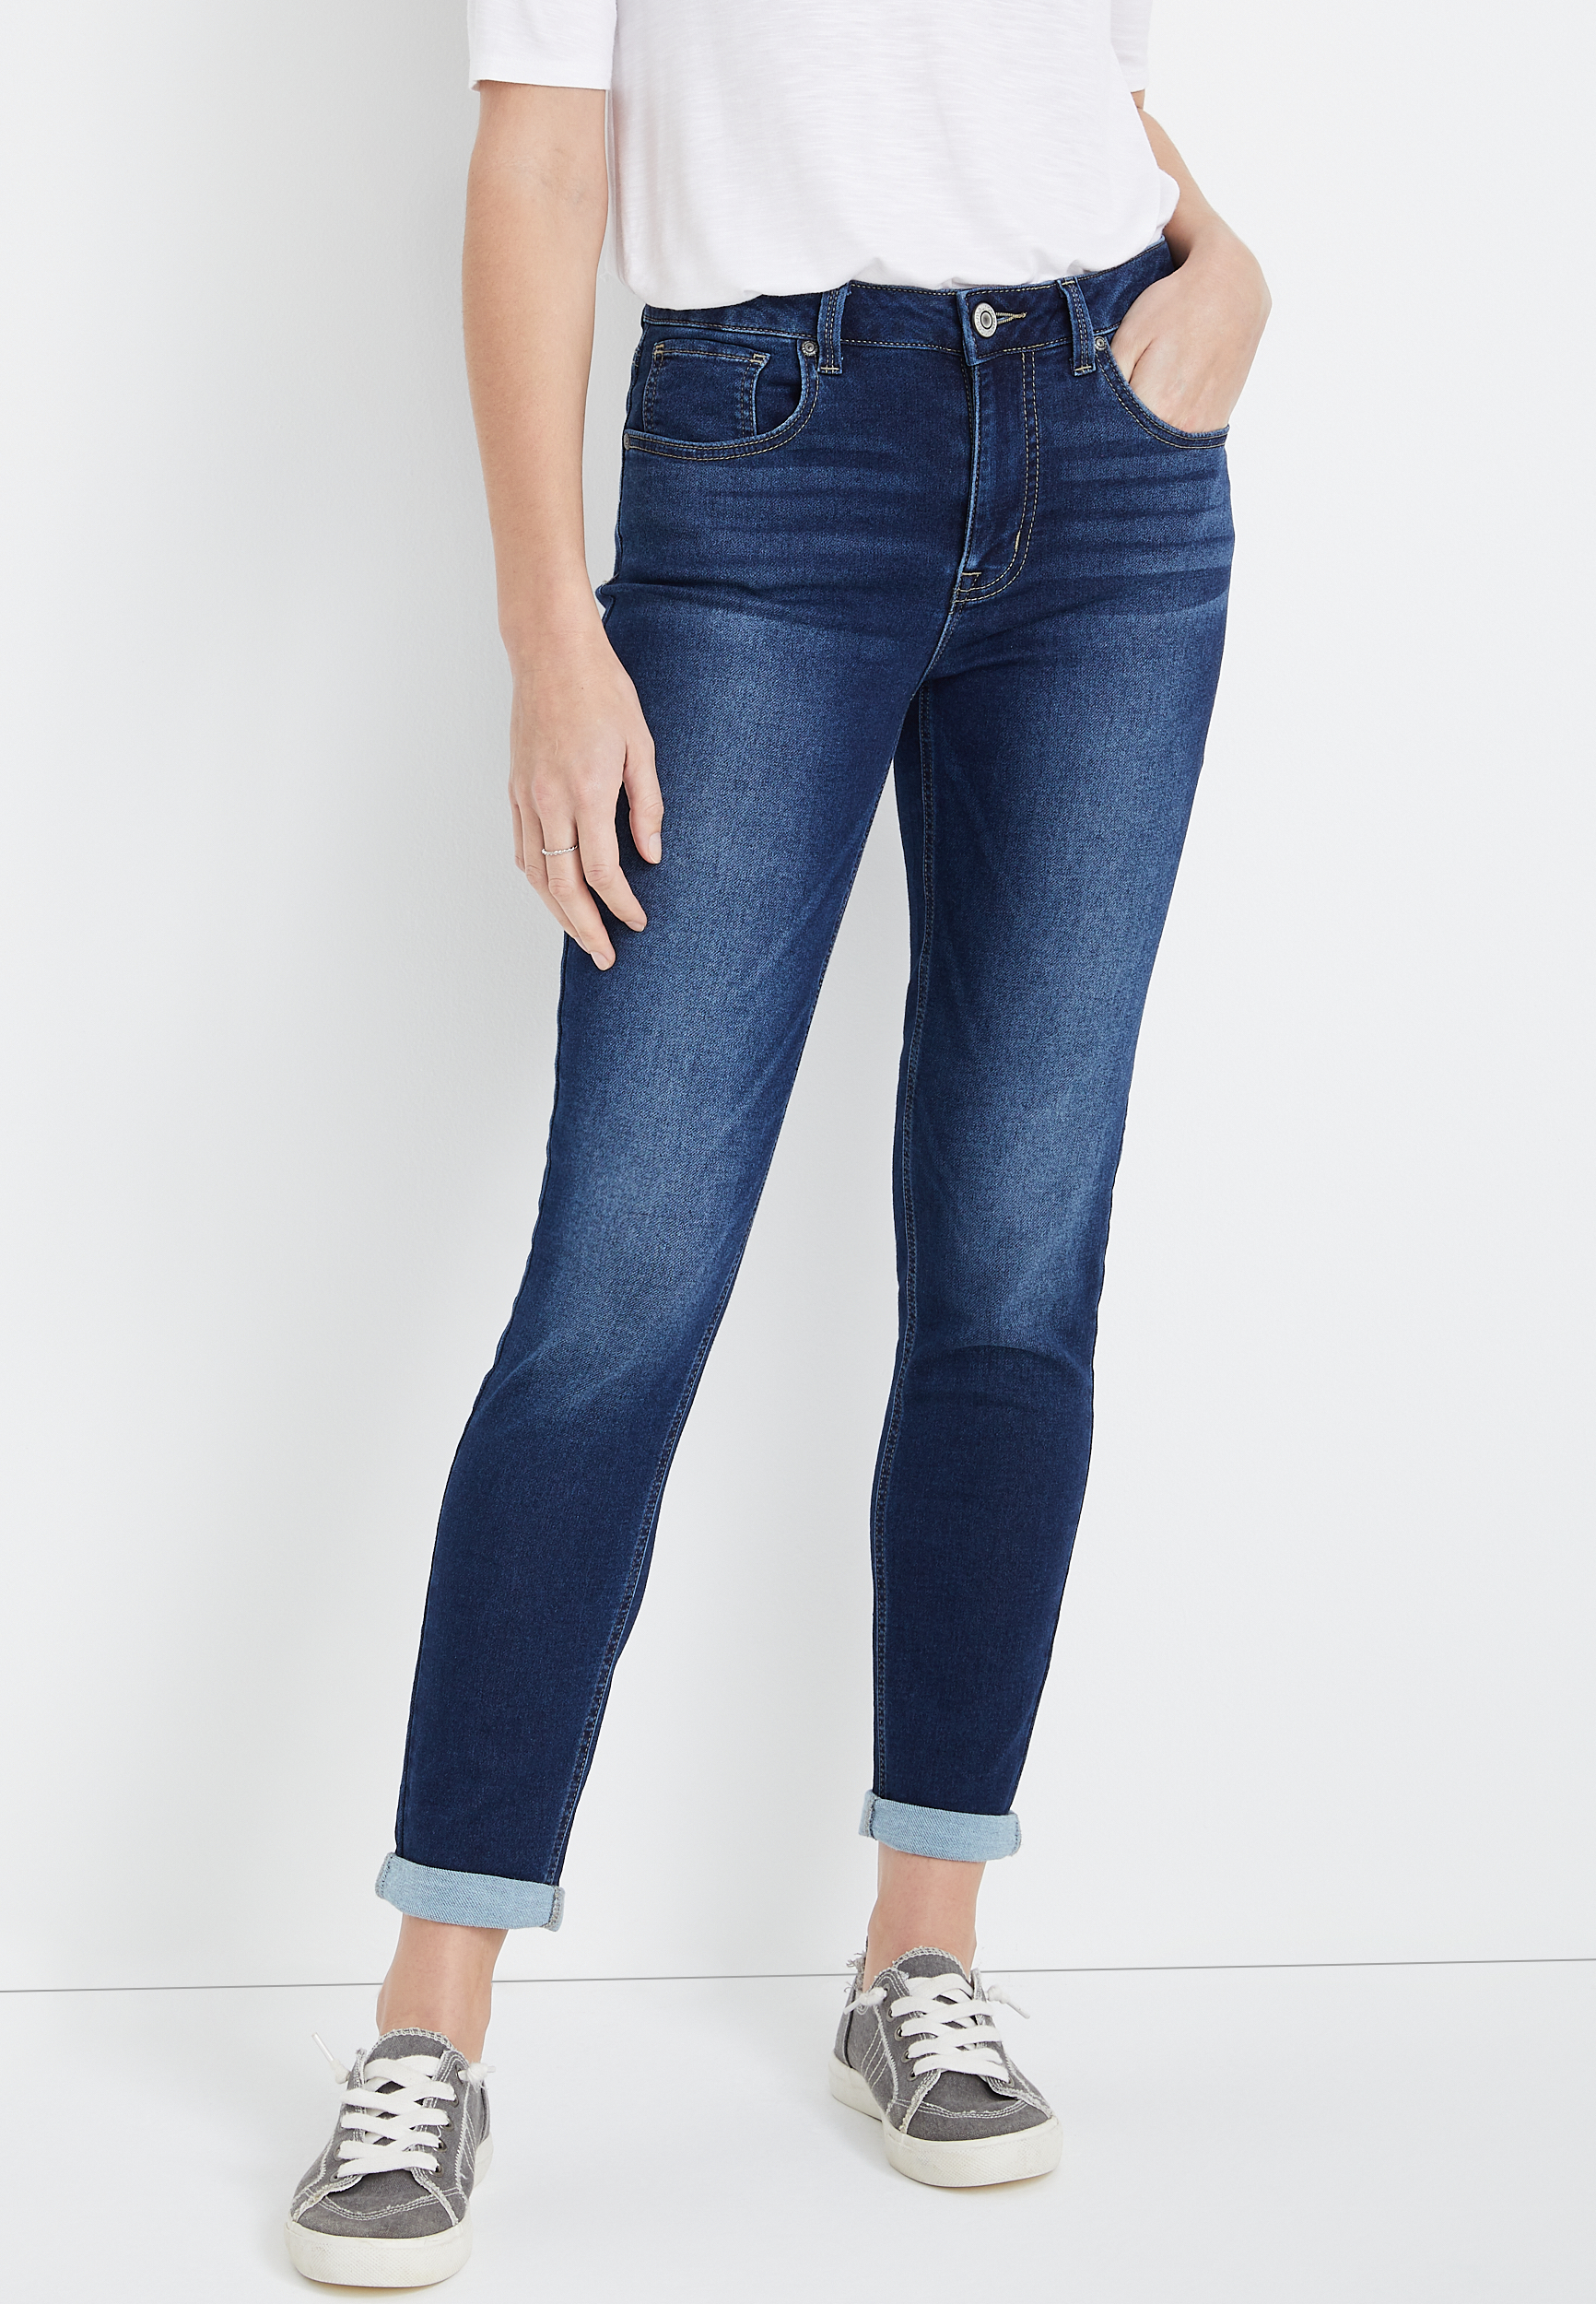 m jeans by maurices™ Super Soft Boyfriend High Rise Jean | maurices